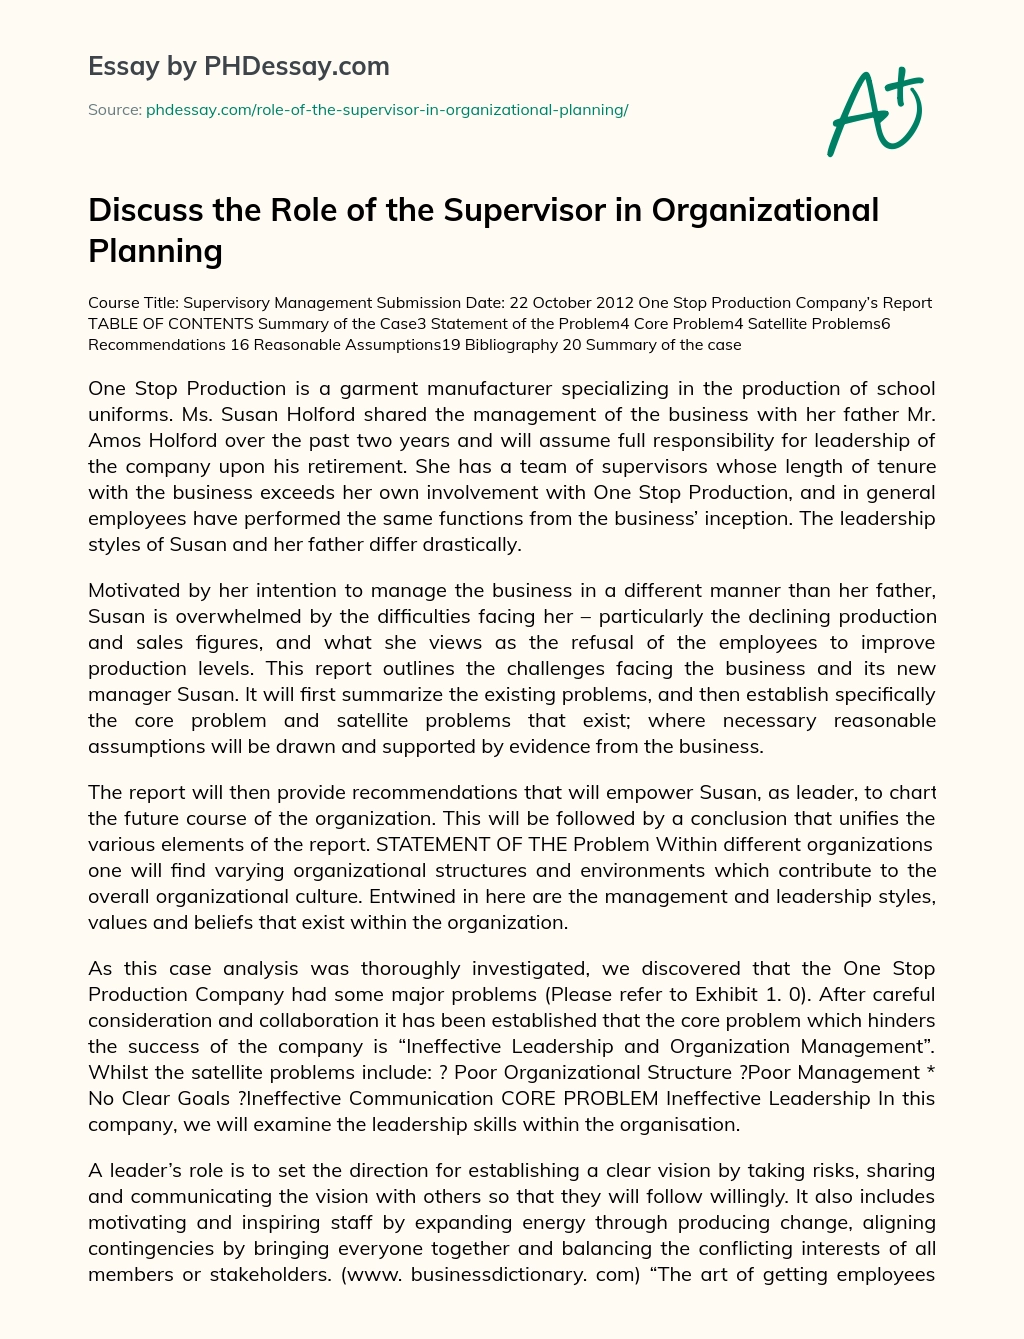 Discuss the Role of the Supervisor in Organizational Planning essay